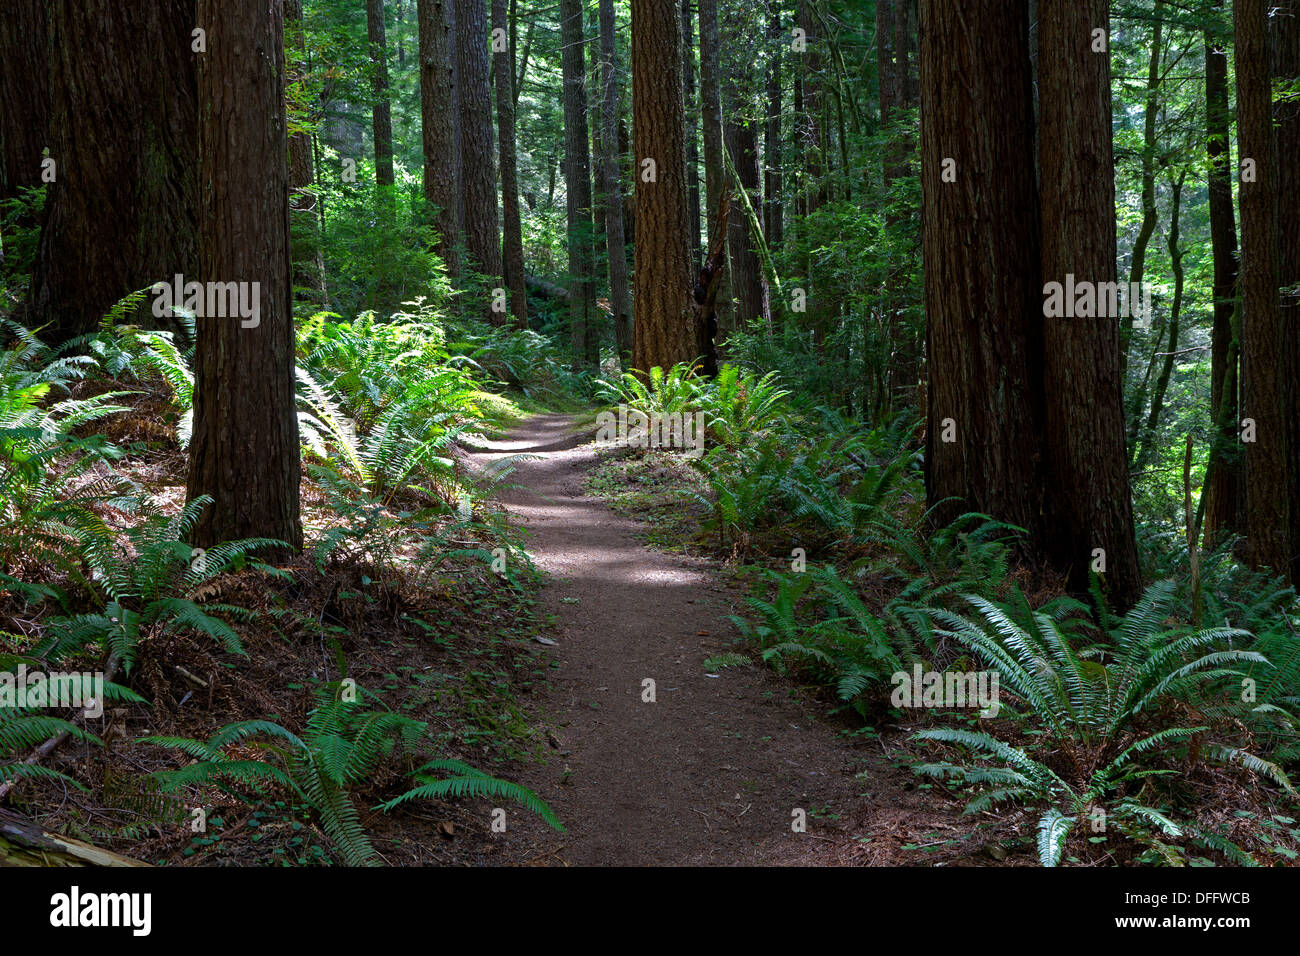 Redwoods, Douglas Fir, and ferns line the trail at Oregon Redwoods Trail in the Siskiyou National Forest near Brookings, Oregon. Stock Photo